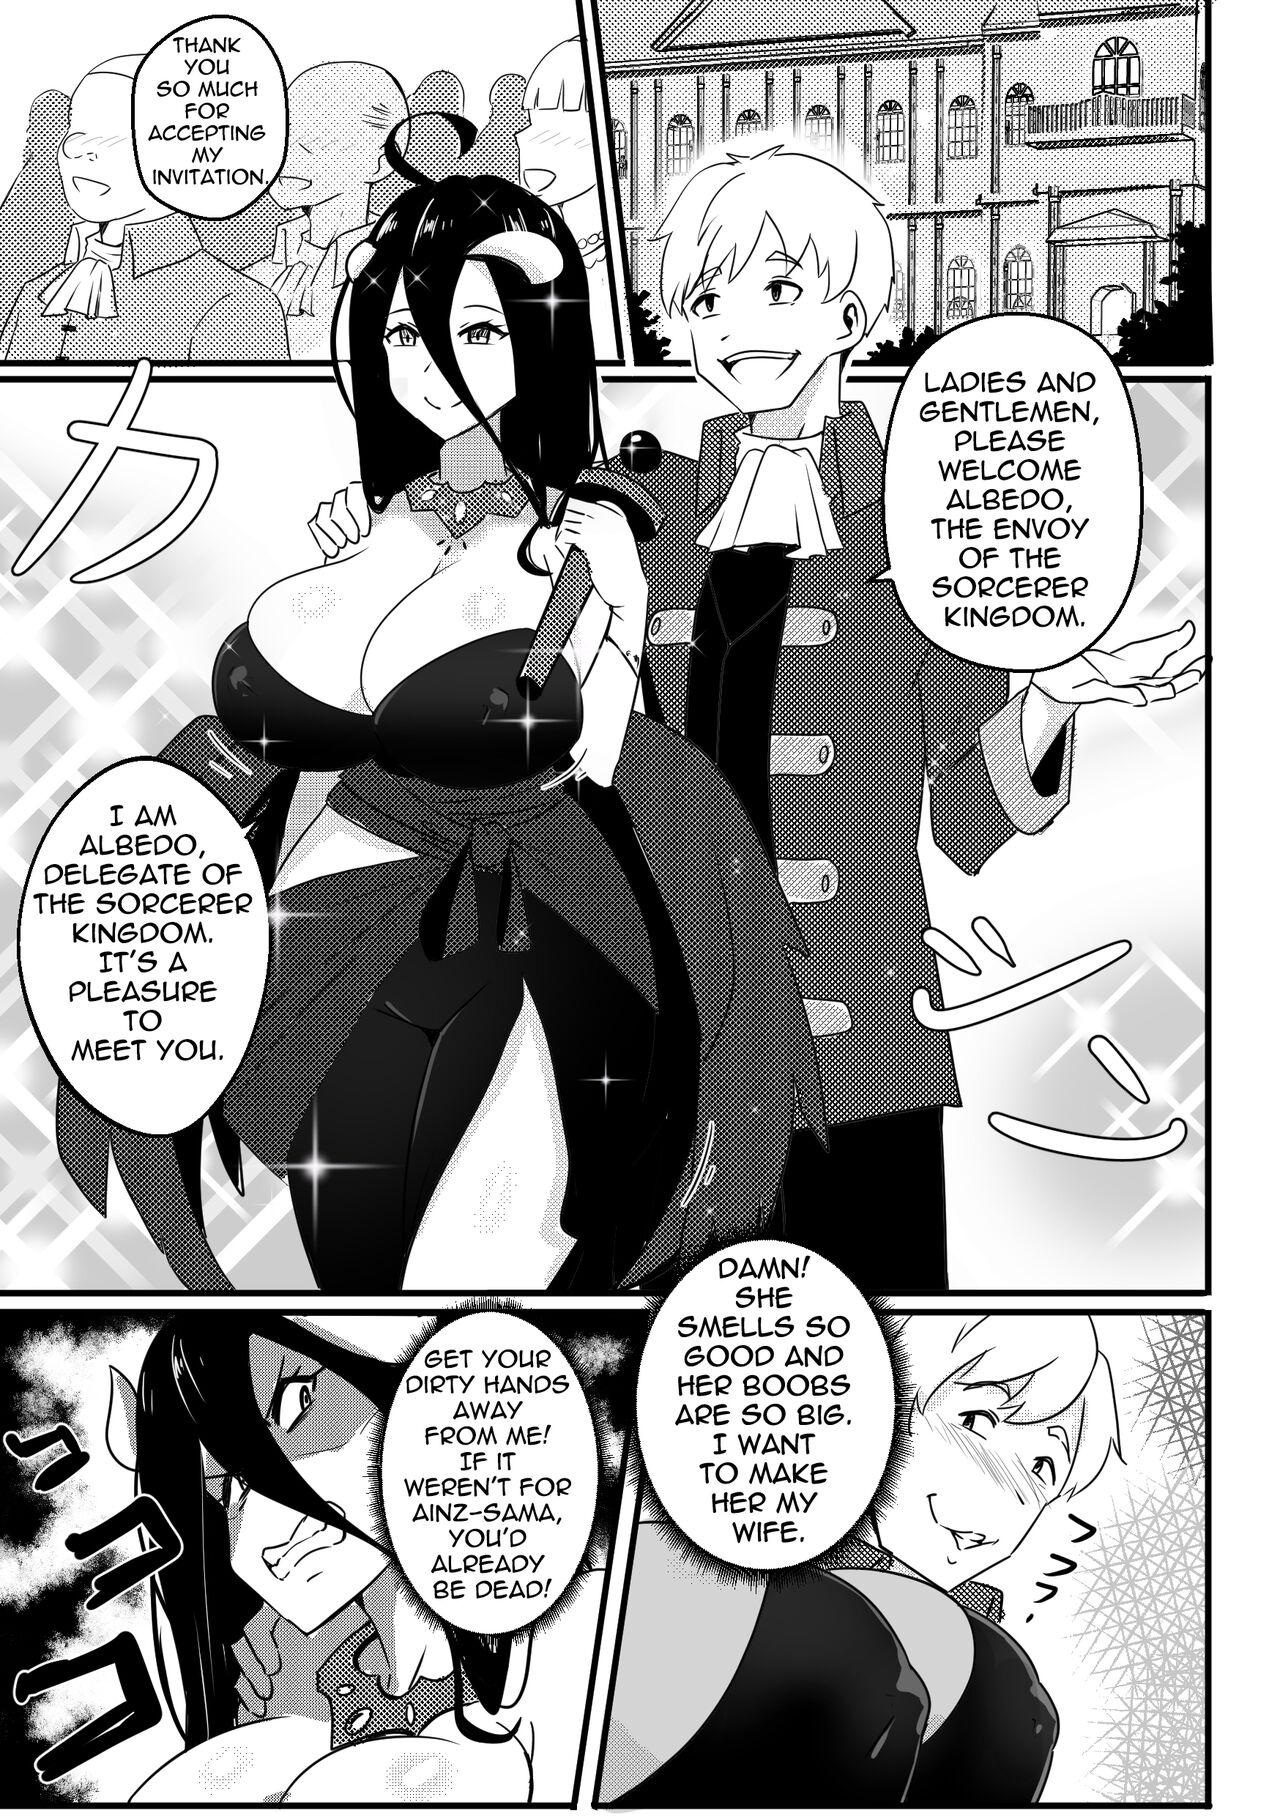 Stepbrother [Merkonig] B-Trayal 40 Albedo (Overlord) Censored [English] - Overlord Blowing - Page 2